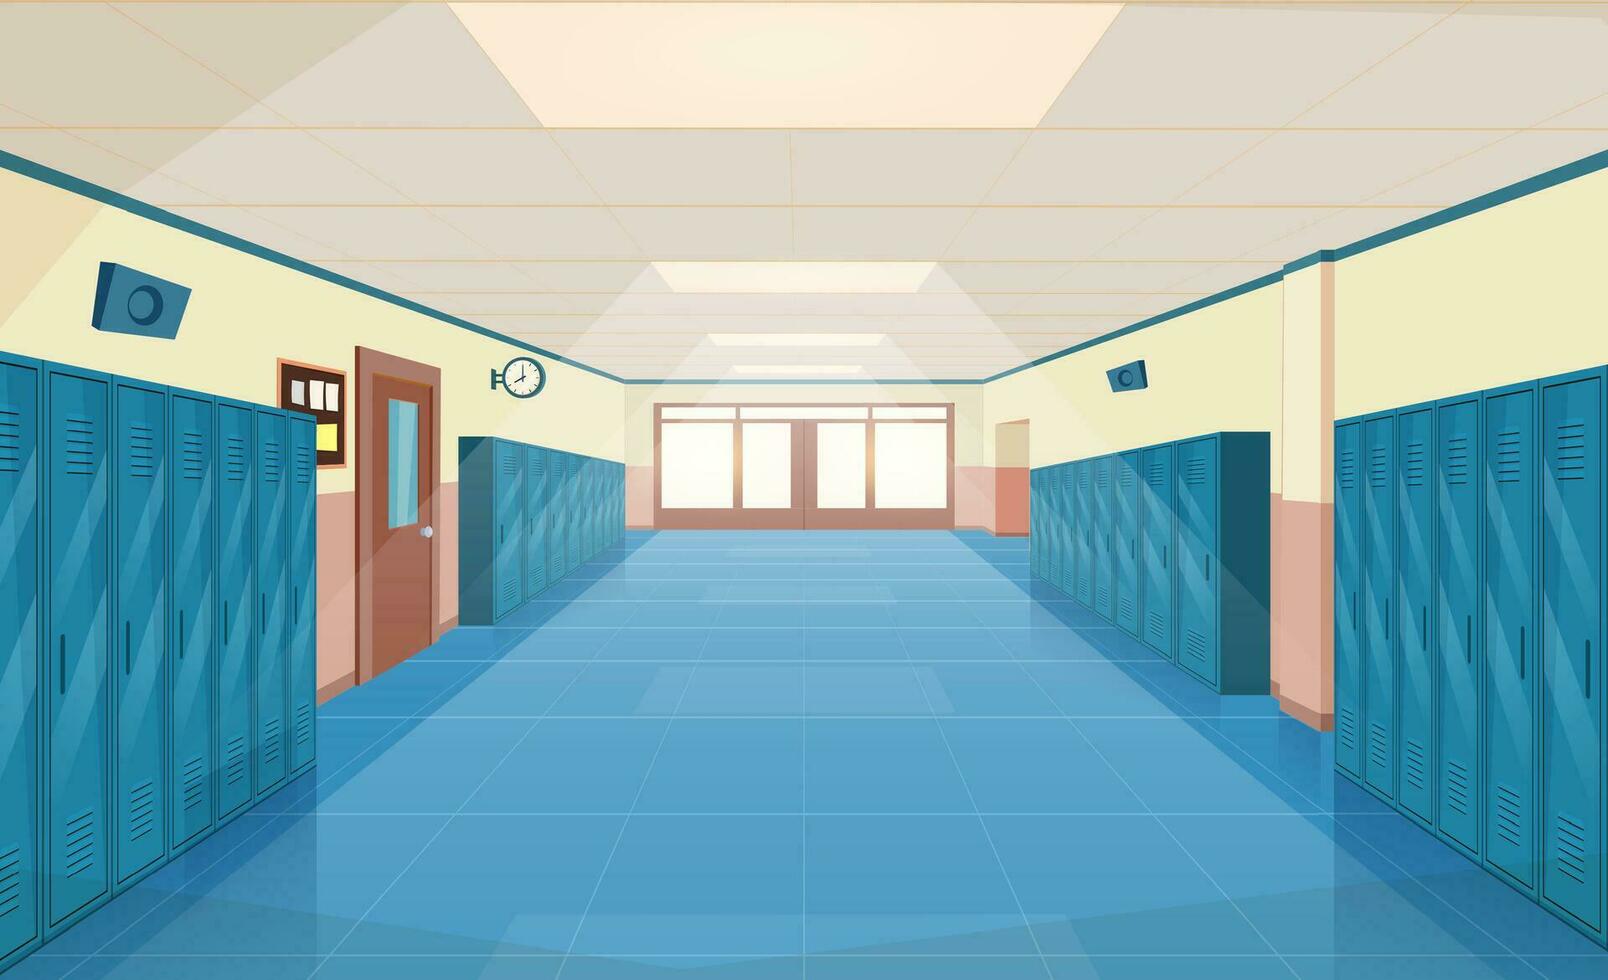 School hallway interior with entrance doors, lockers and bulletin board on wall. empty corridor in college, university with closed classrooms doors. Vector illustration in a flat style